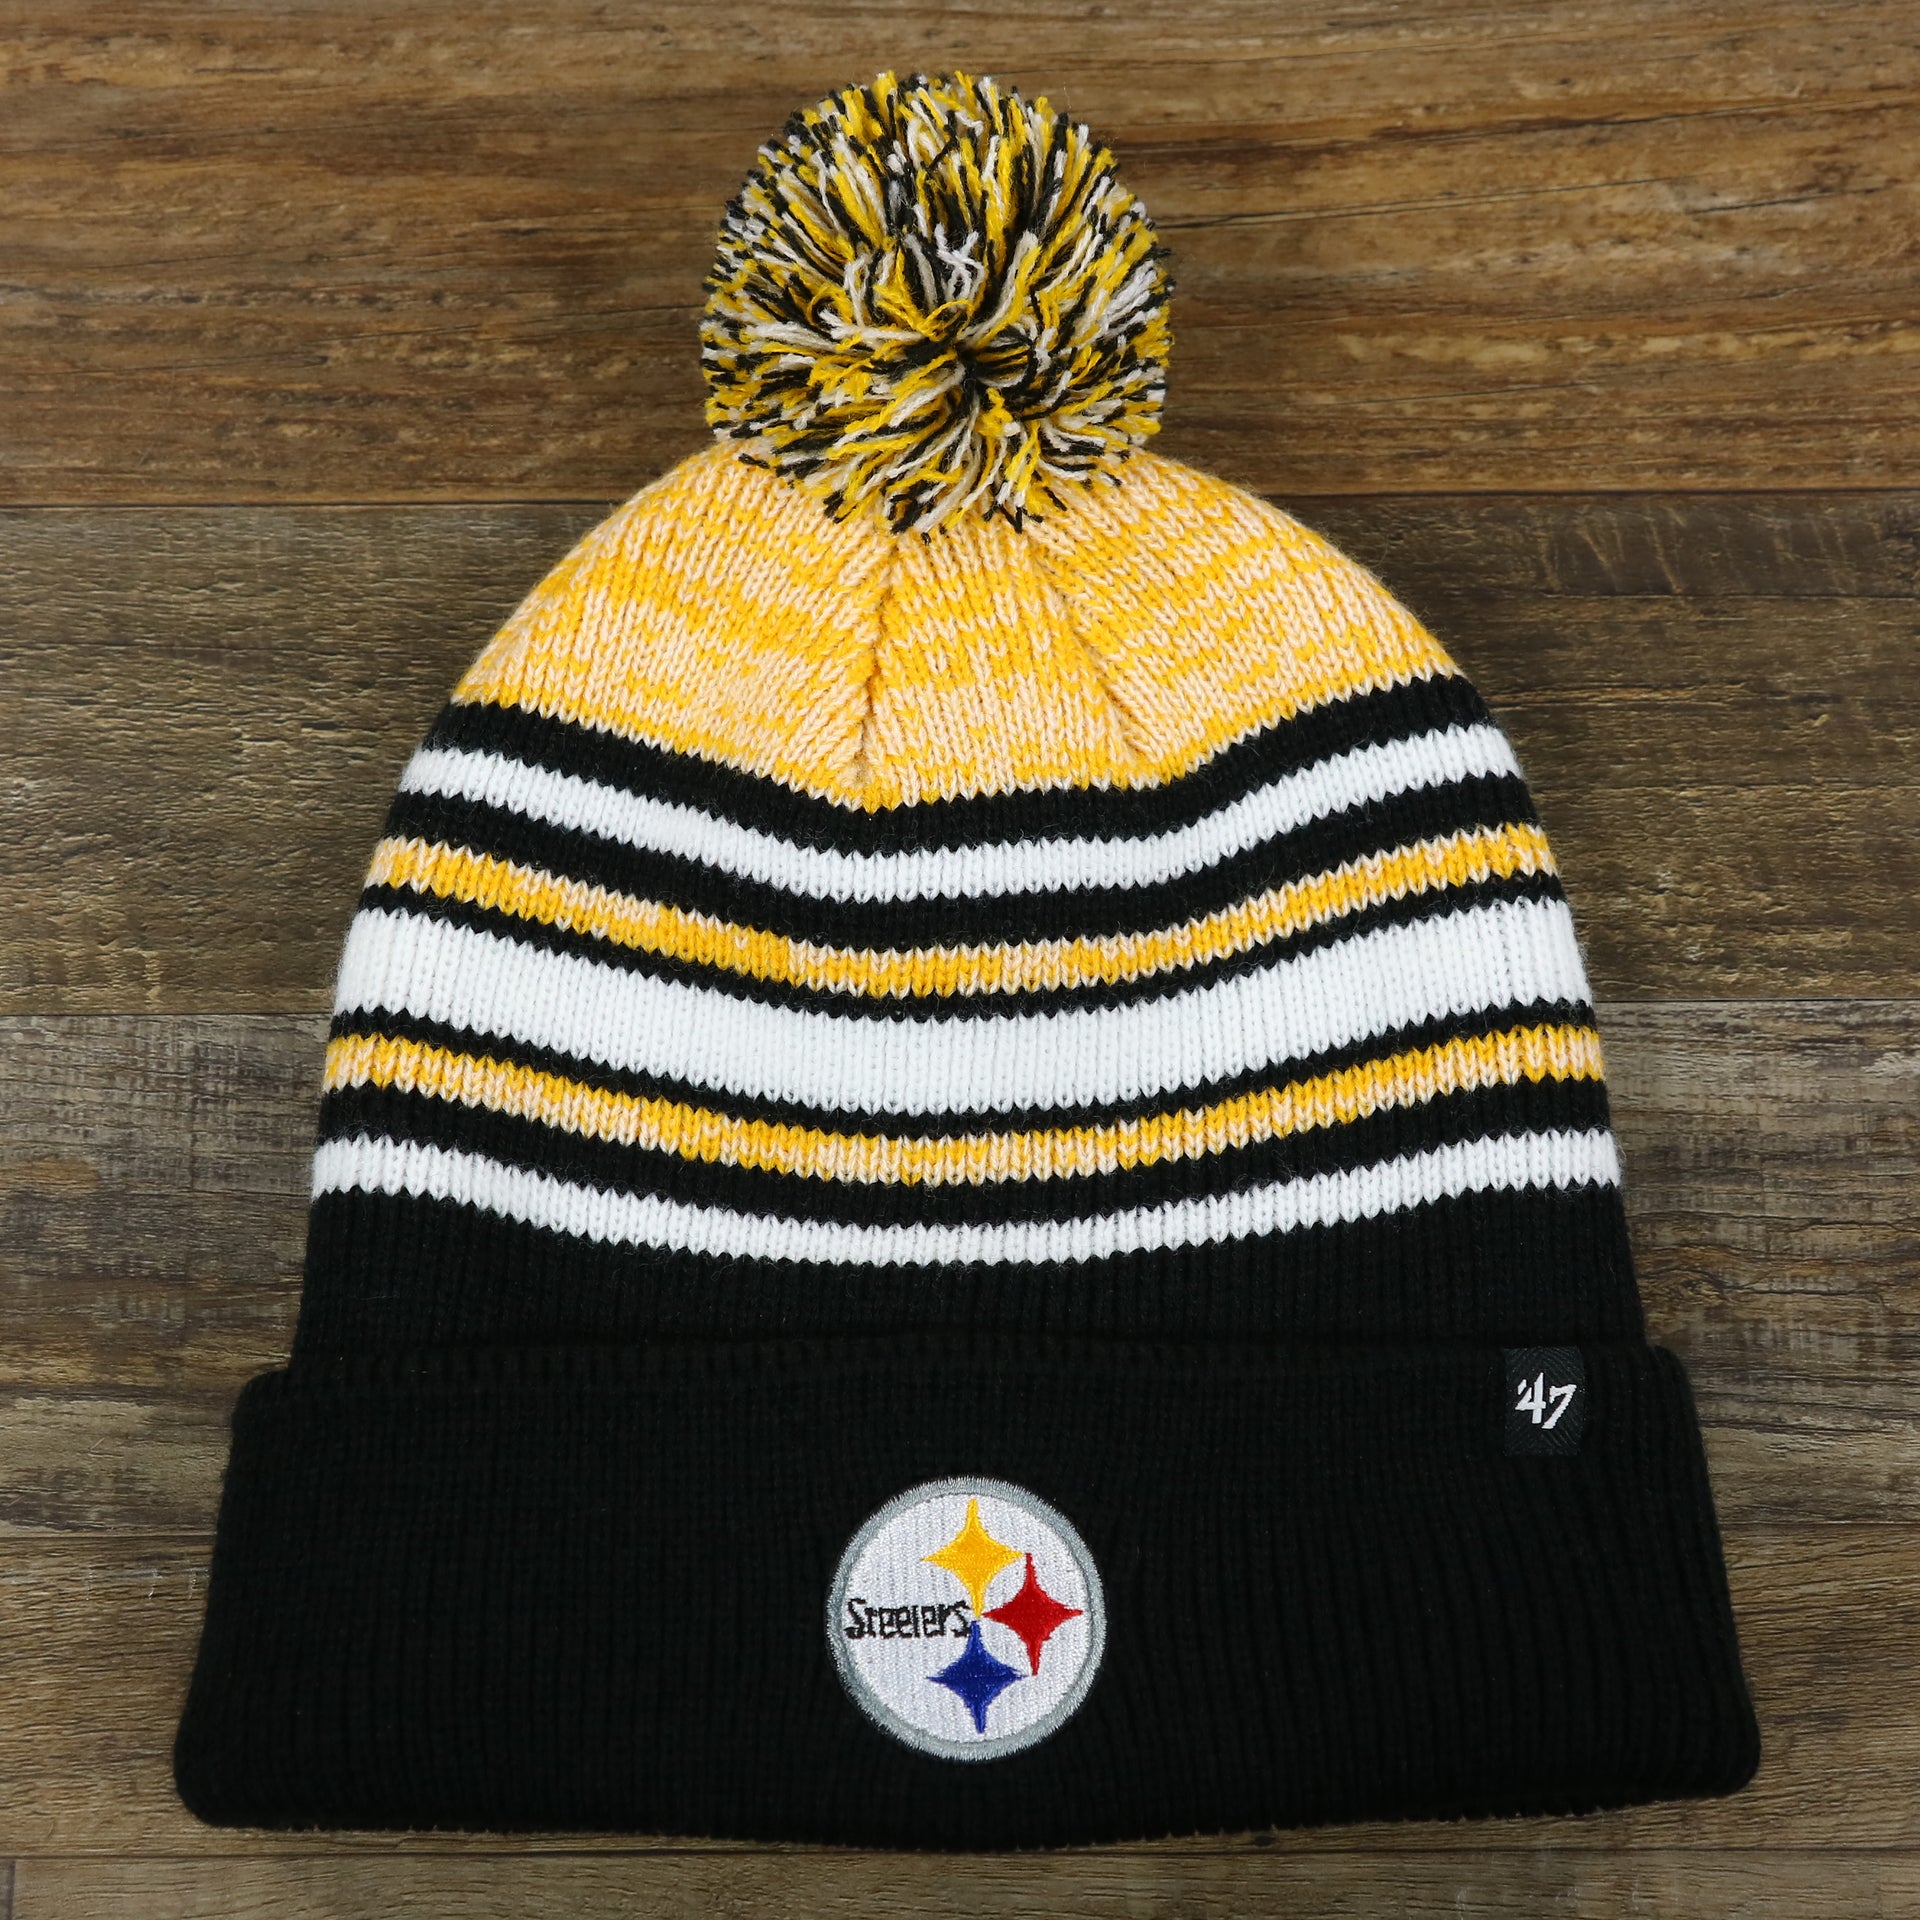 The front of the Kid’s Pittsburgh Steelers Striped Pom Pom Winter Beanie | Black, Yellow, And White Beanie